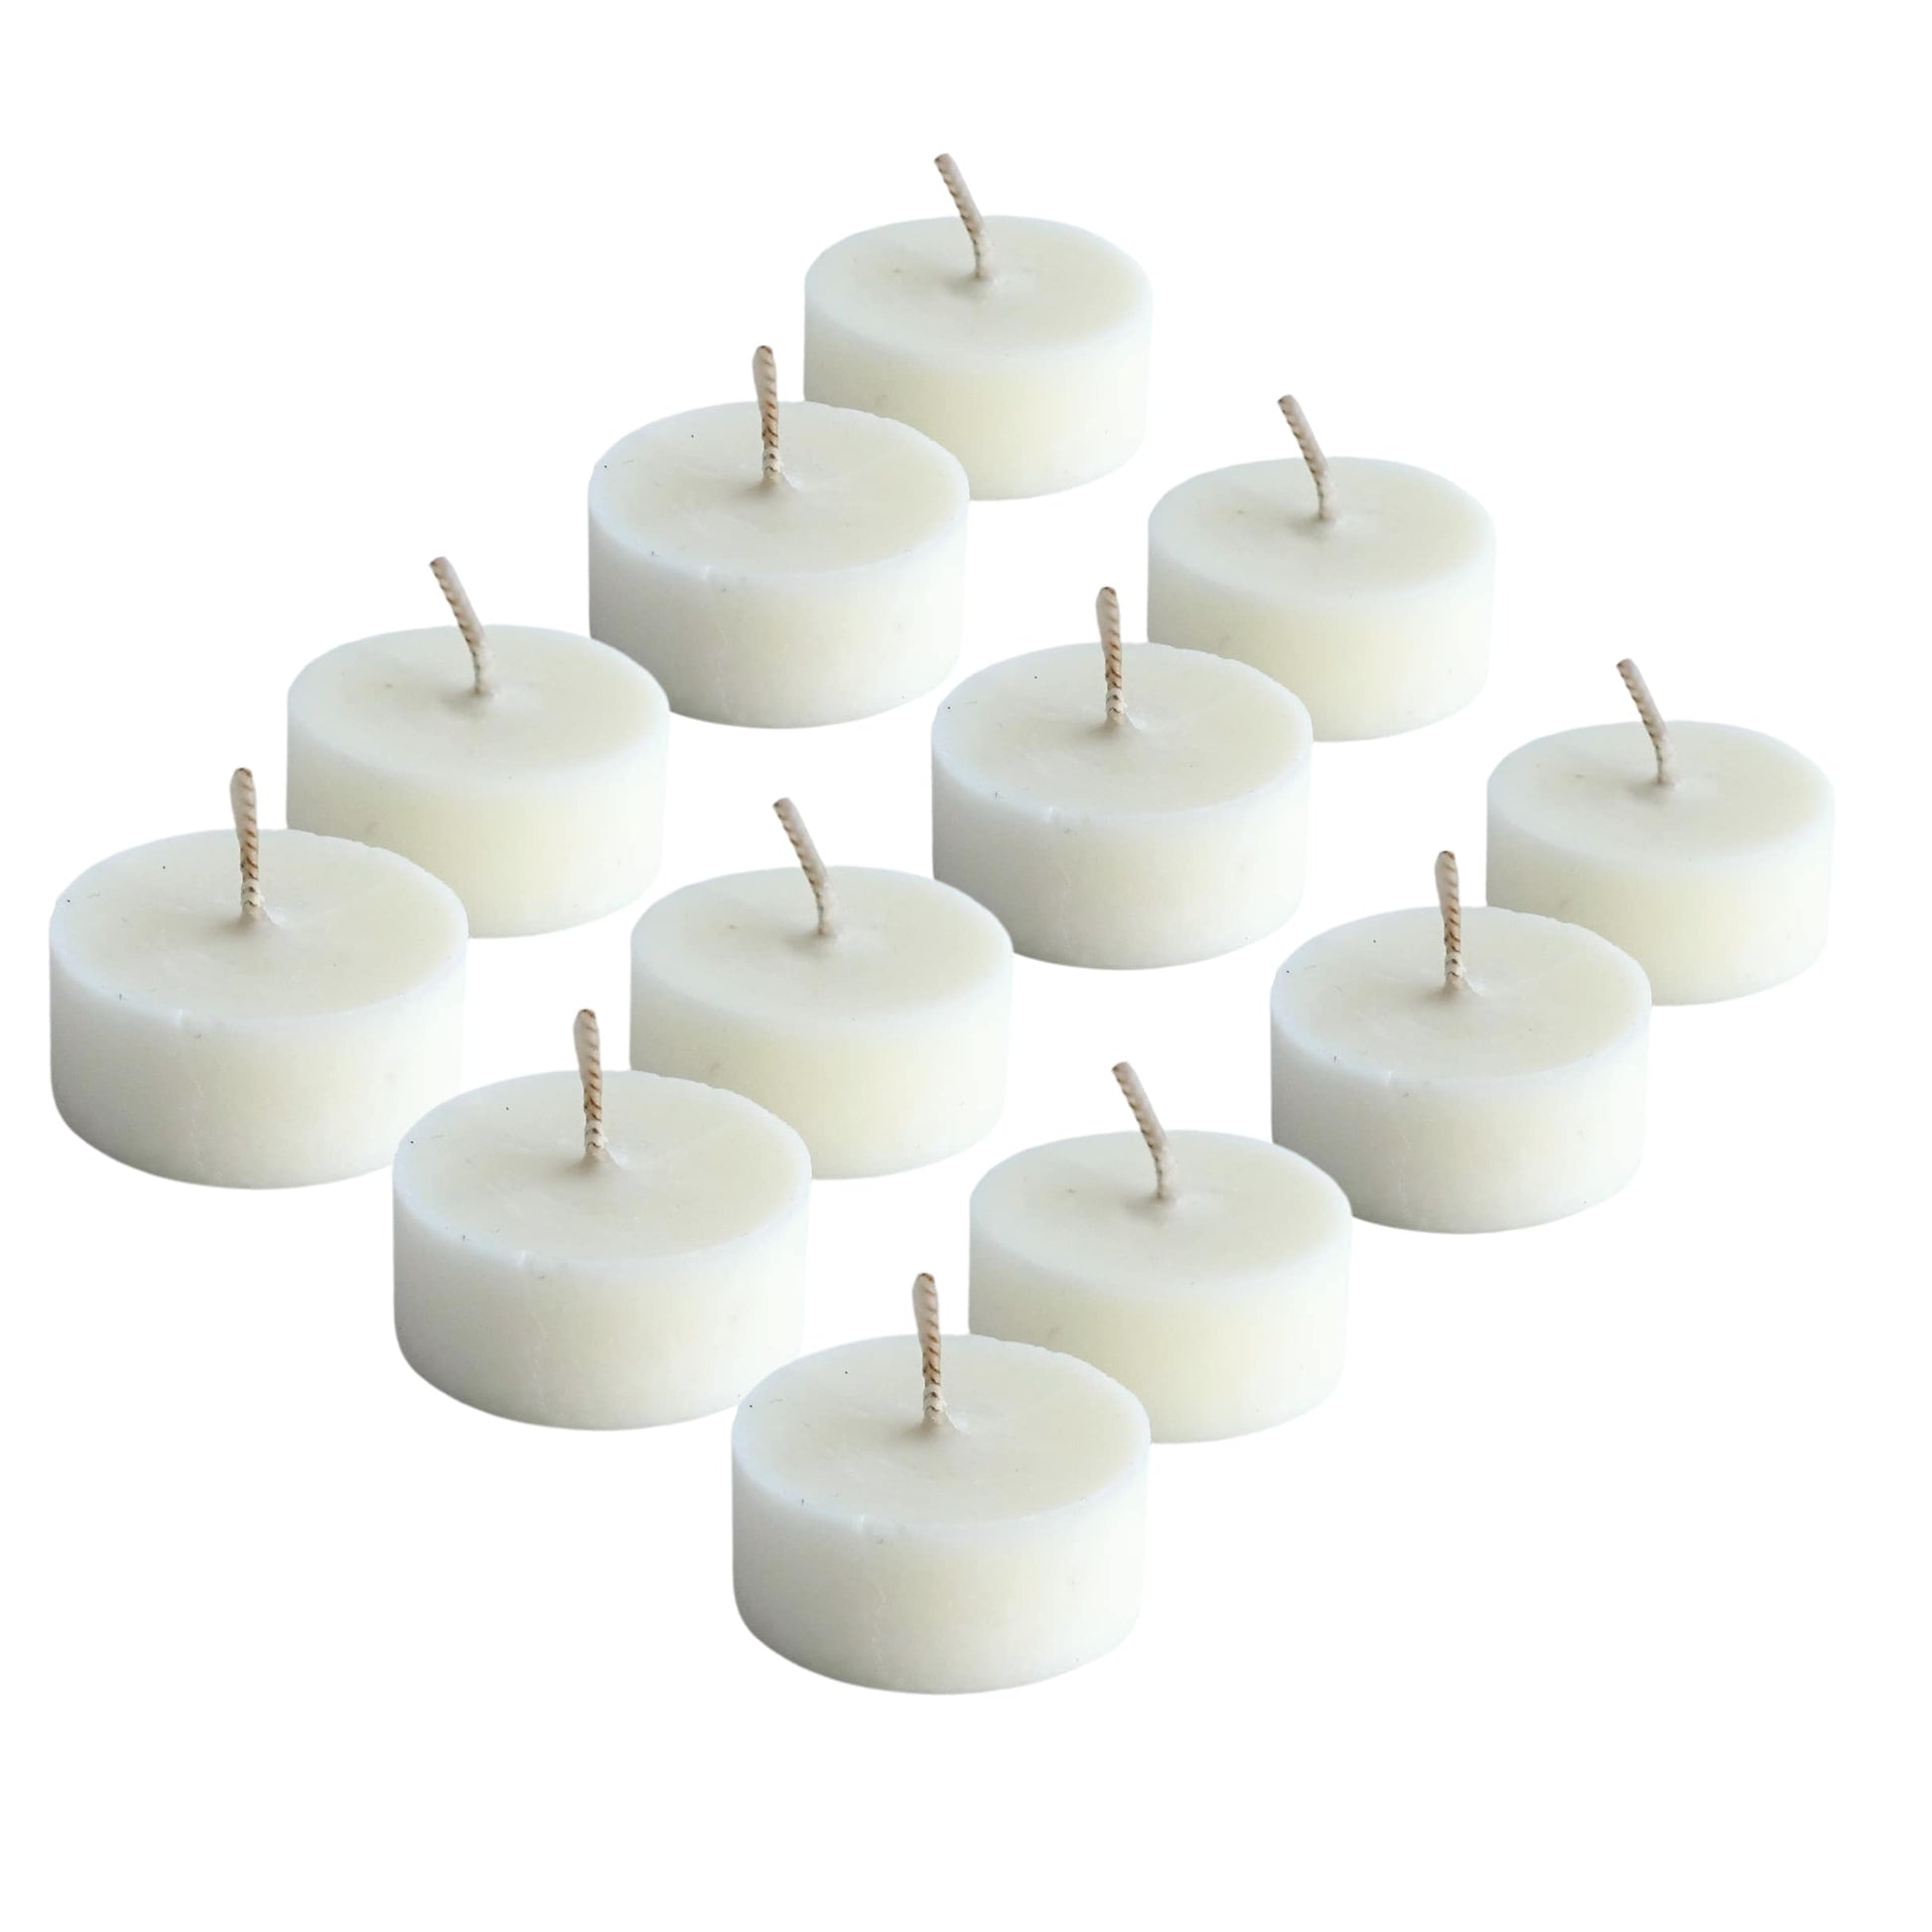  12 Shō-moon Natural Tealights Candle Refills with pure essentials oils and clean burning and natural wax 